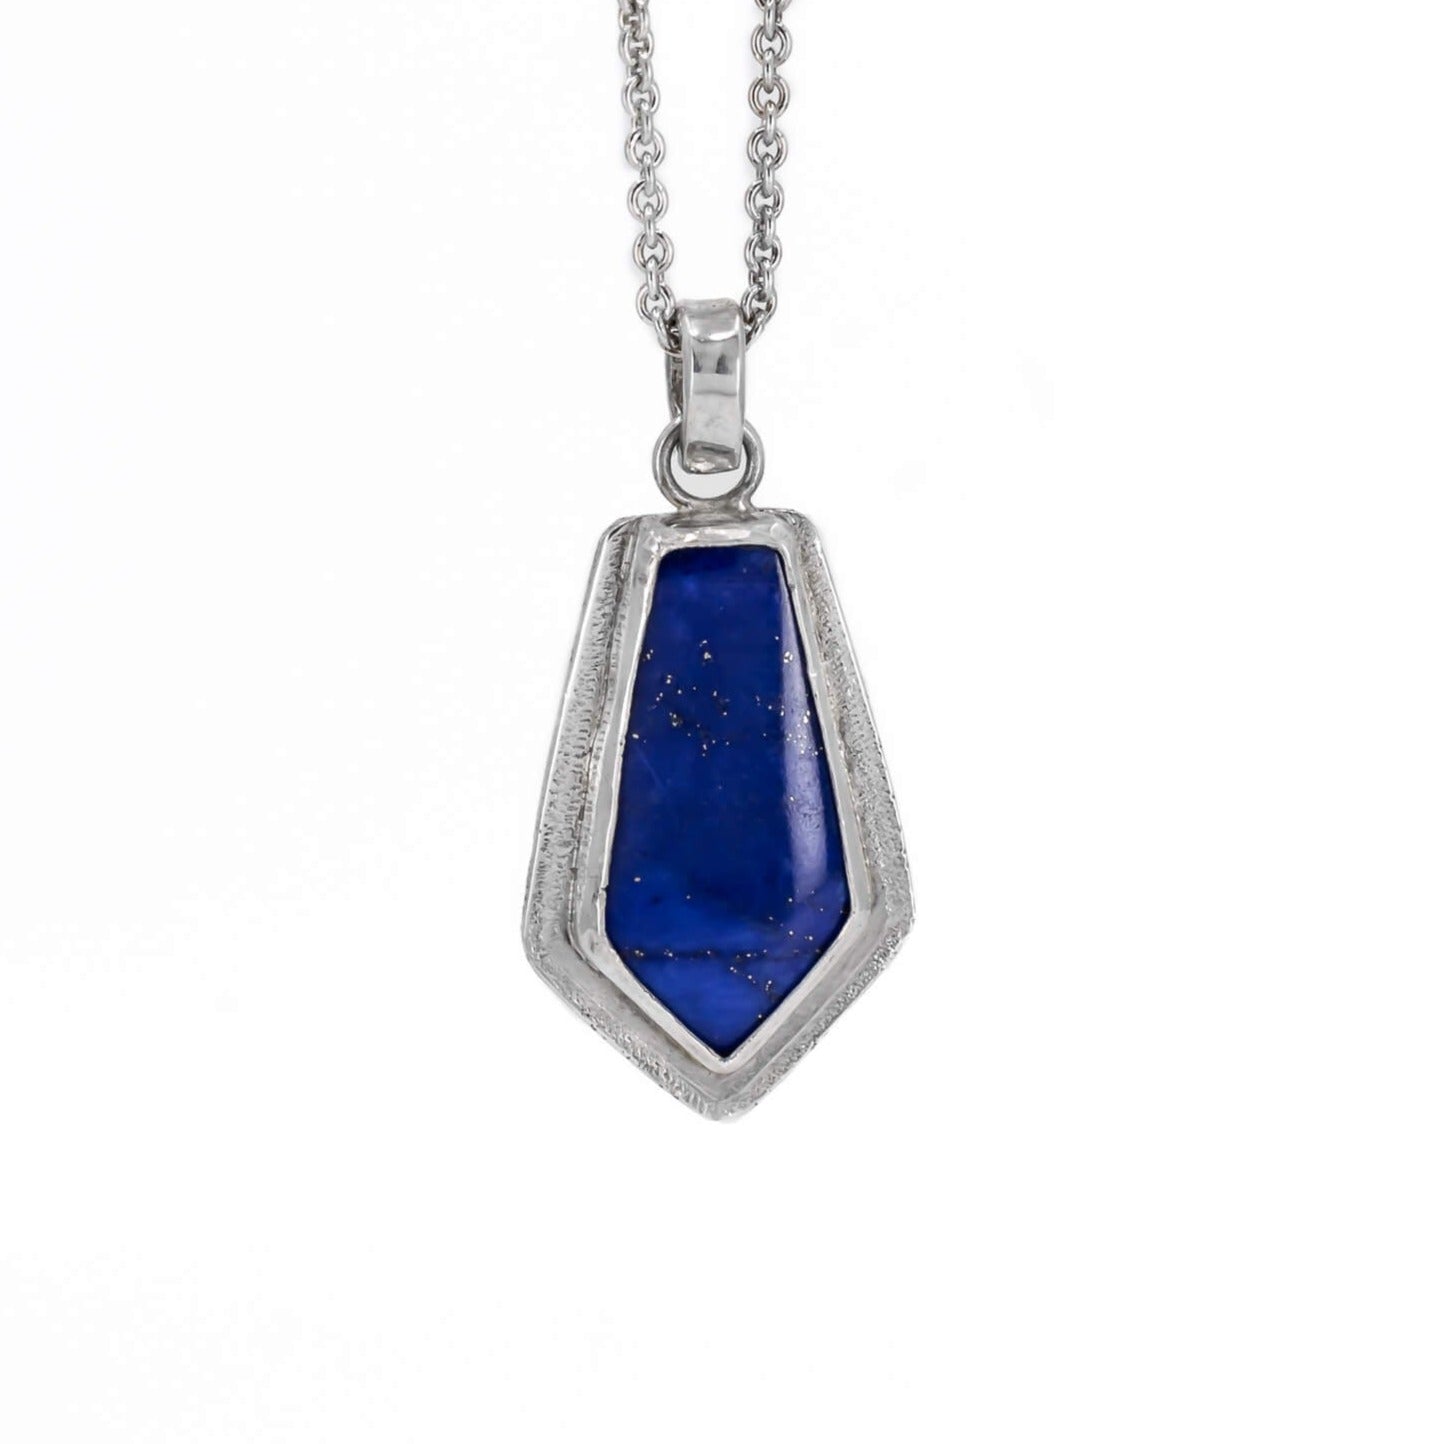 Lapis lazuli kite shaped pendant necklace in sterling silver with a star dust textured border hanging on a cable chain